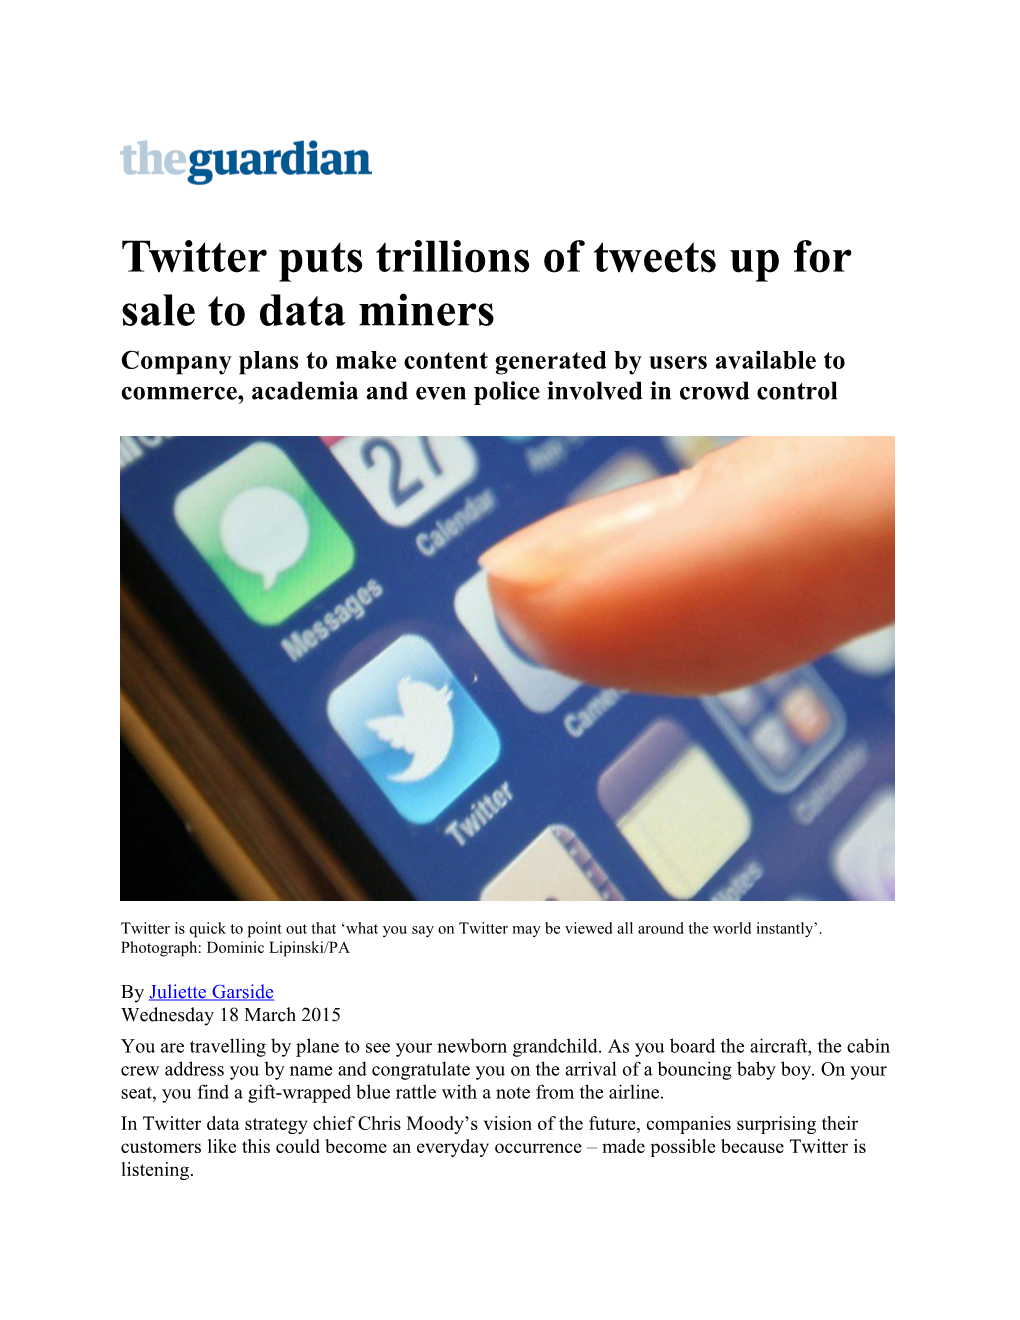 Twitter Puts Trillions of Tweets up for Sale to Data Miners